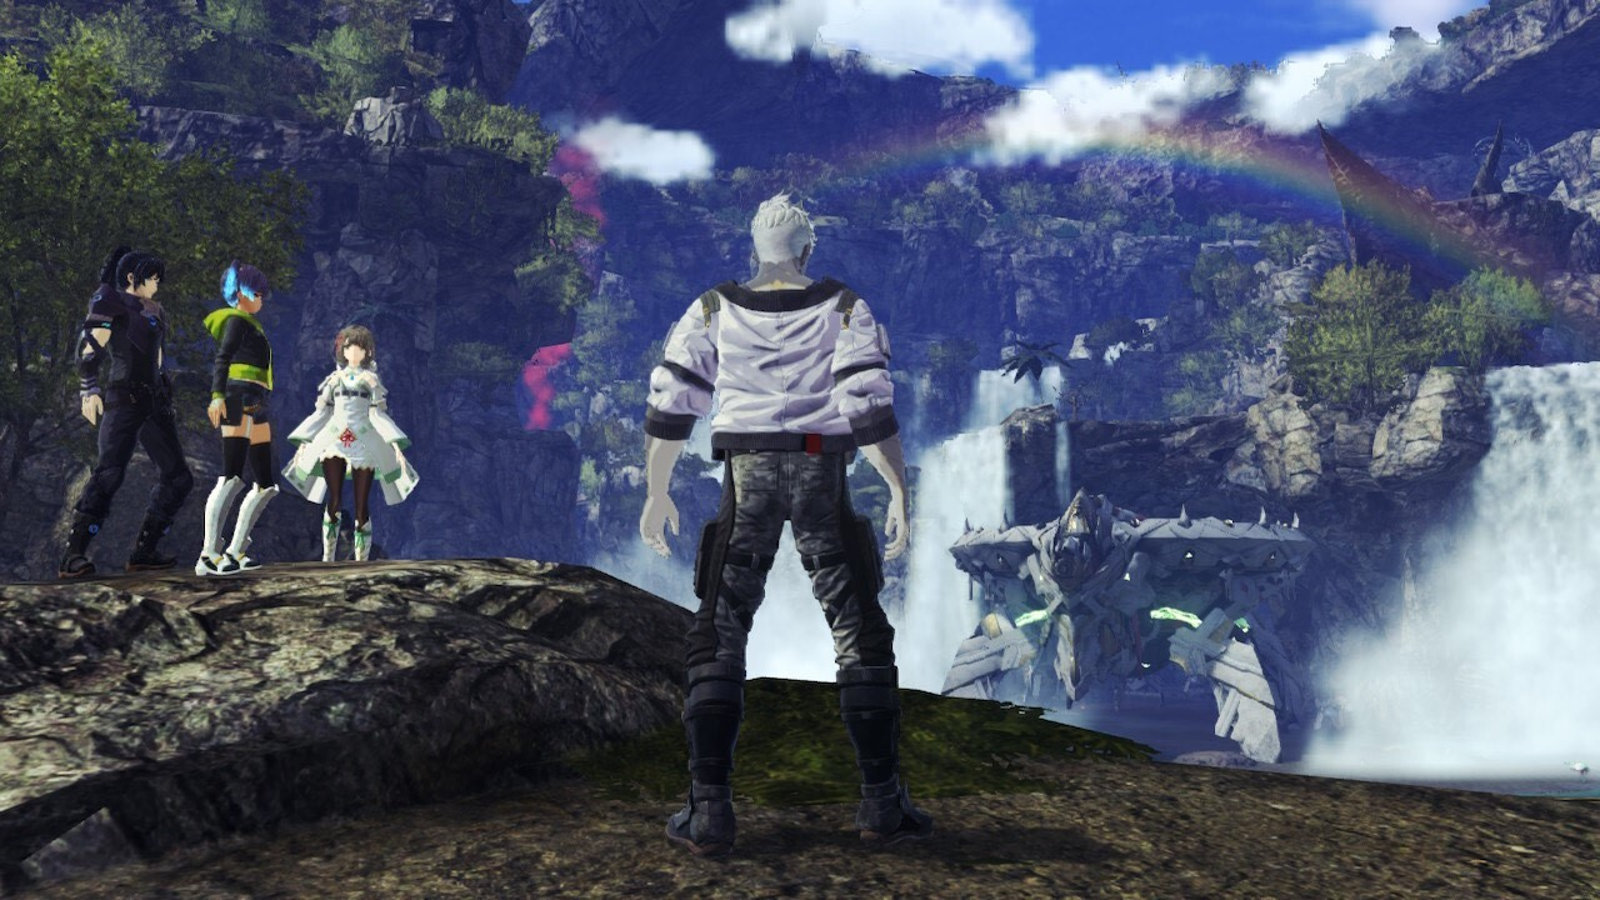 REVIEW: Xenoblade Chronicles 3 - oprainfall